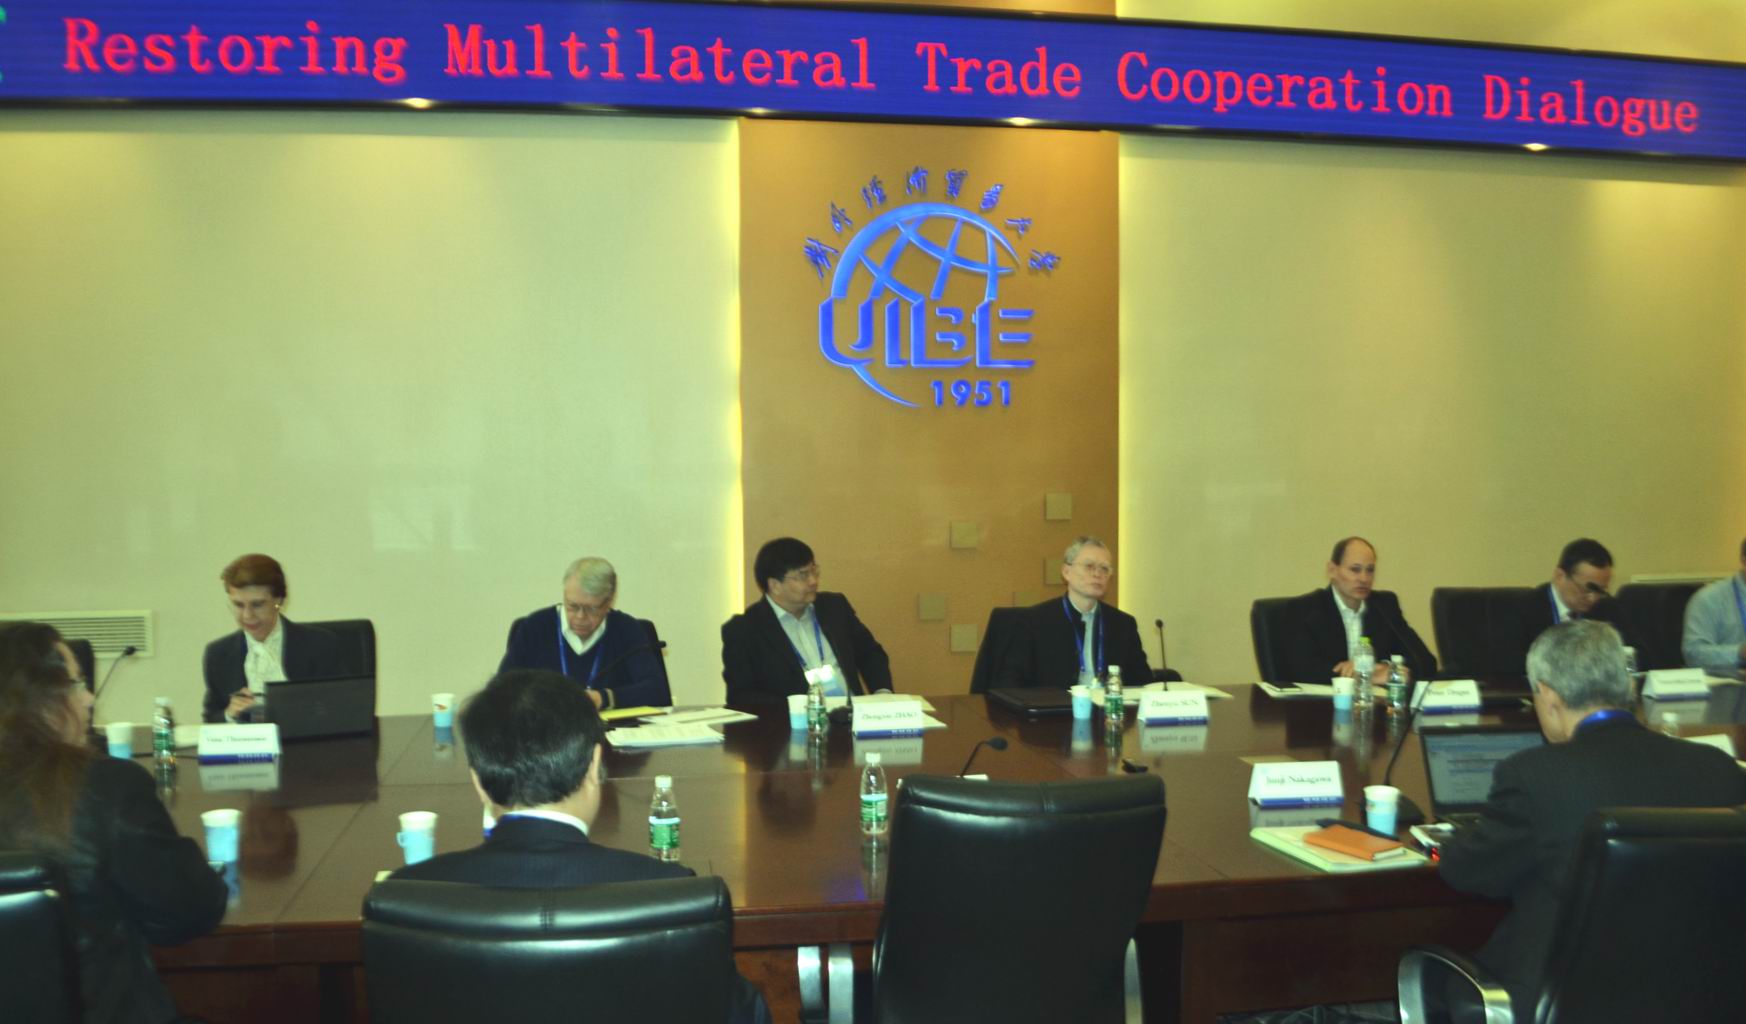 The President of China Society for World Trade Organization Studies Attends the Roundtable on “Restoring Multilateral Trade Cooperation Dialogue”